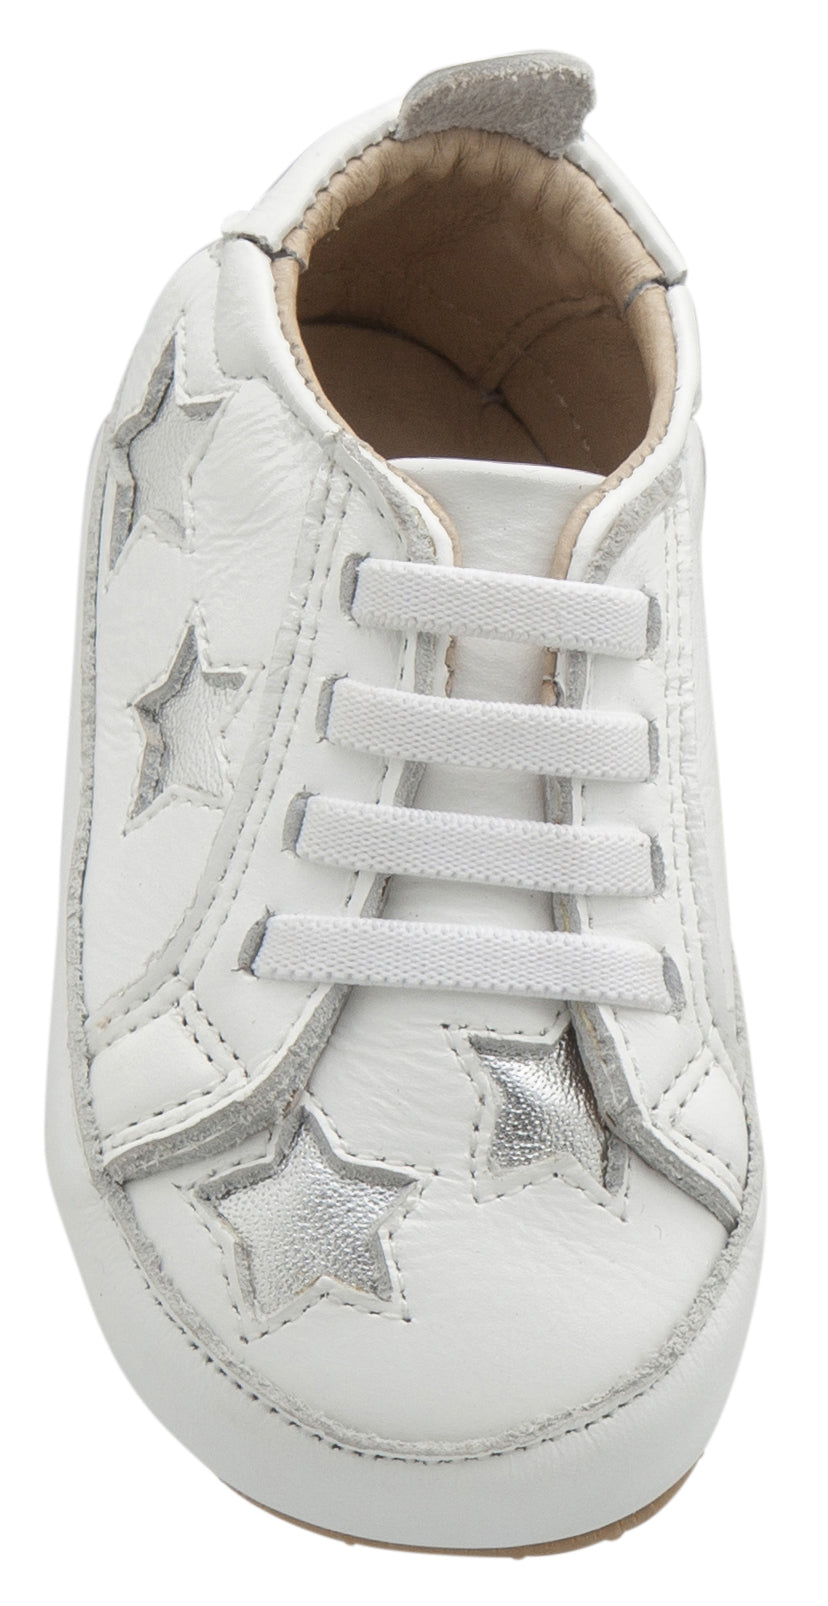 Old Soles Girl's & Boy's 0024R Starey Bambini White with Silver Stars Leather Elastic Slip On Sneakers